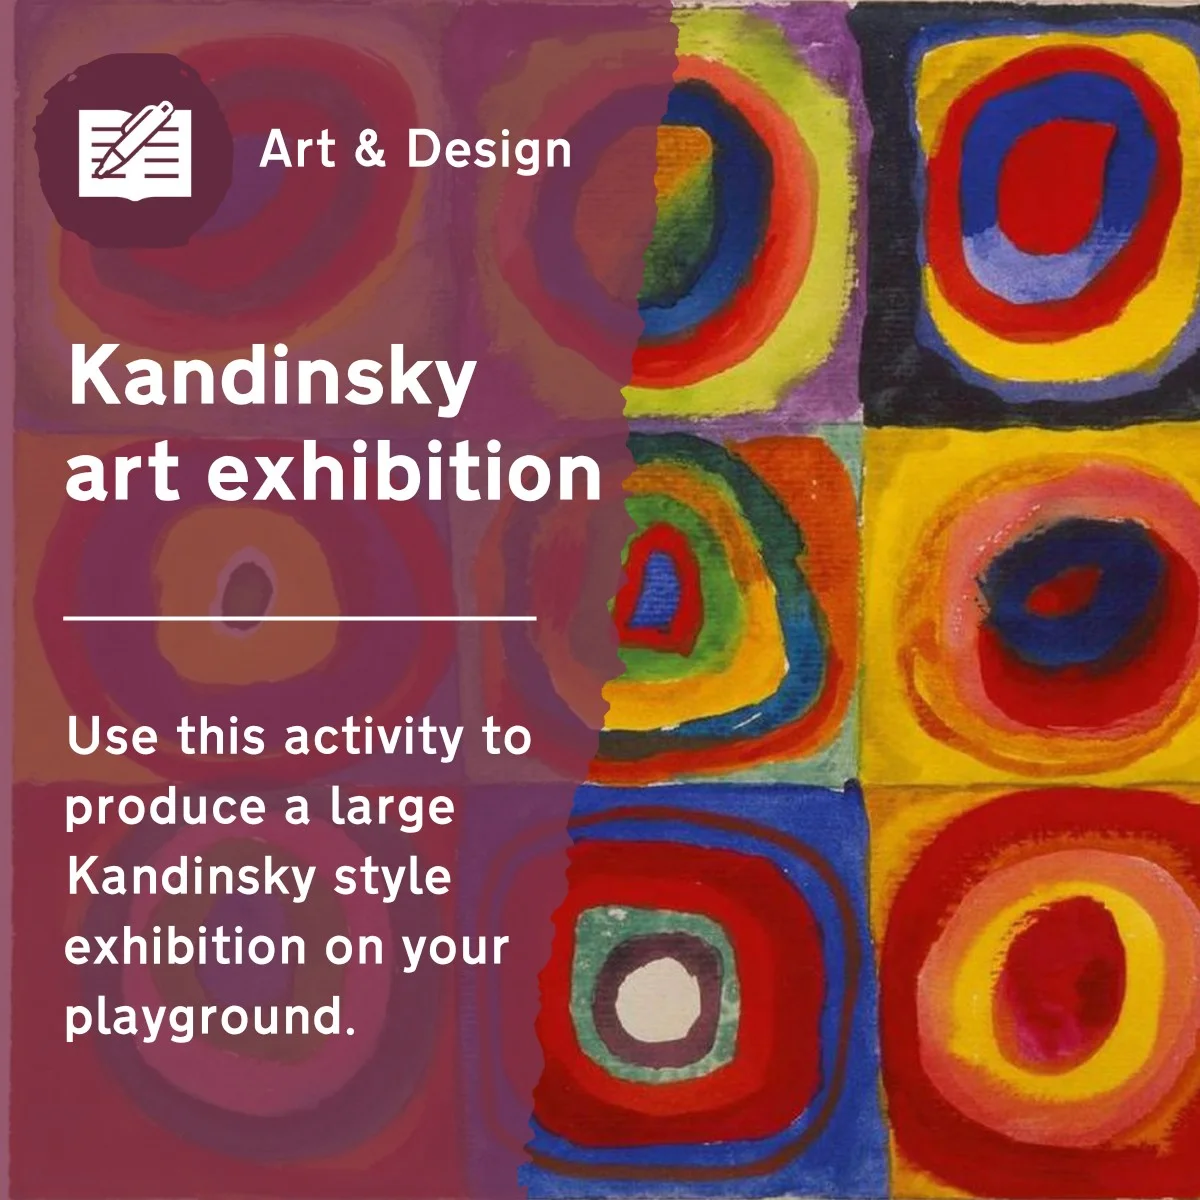 Use this primary art activity to produce a large Kandinsky style exhibition on your playground. This outdoor lesson idea will encourage creativity and team work to learn about a famous abstract artist.